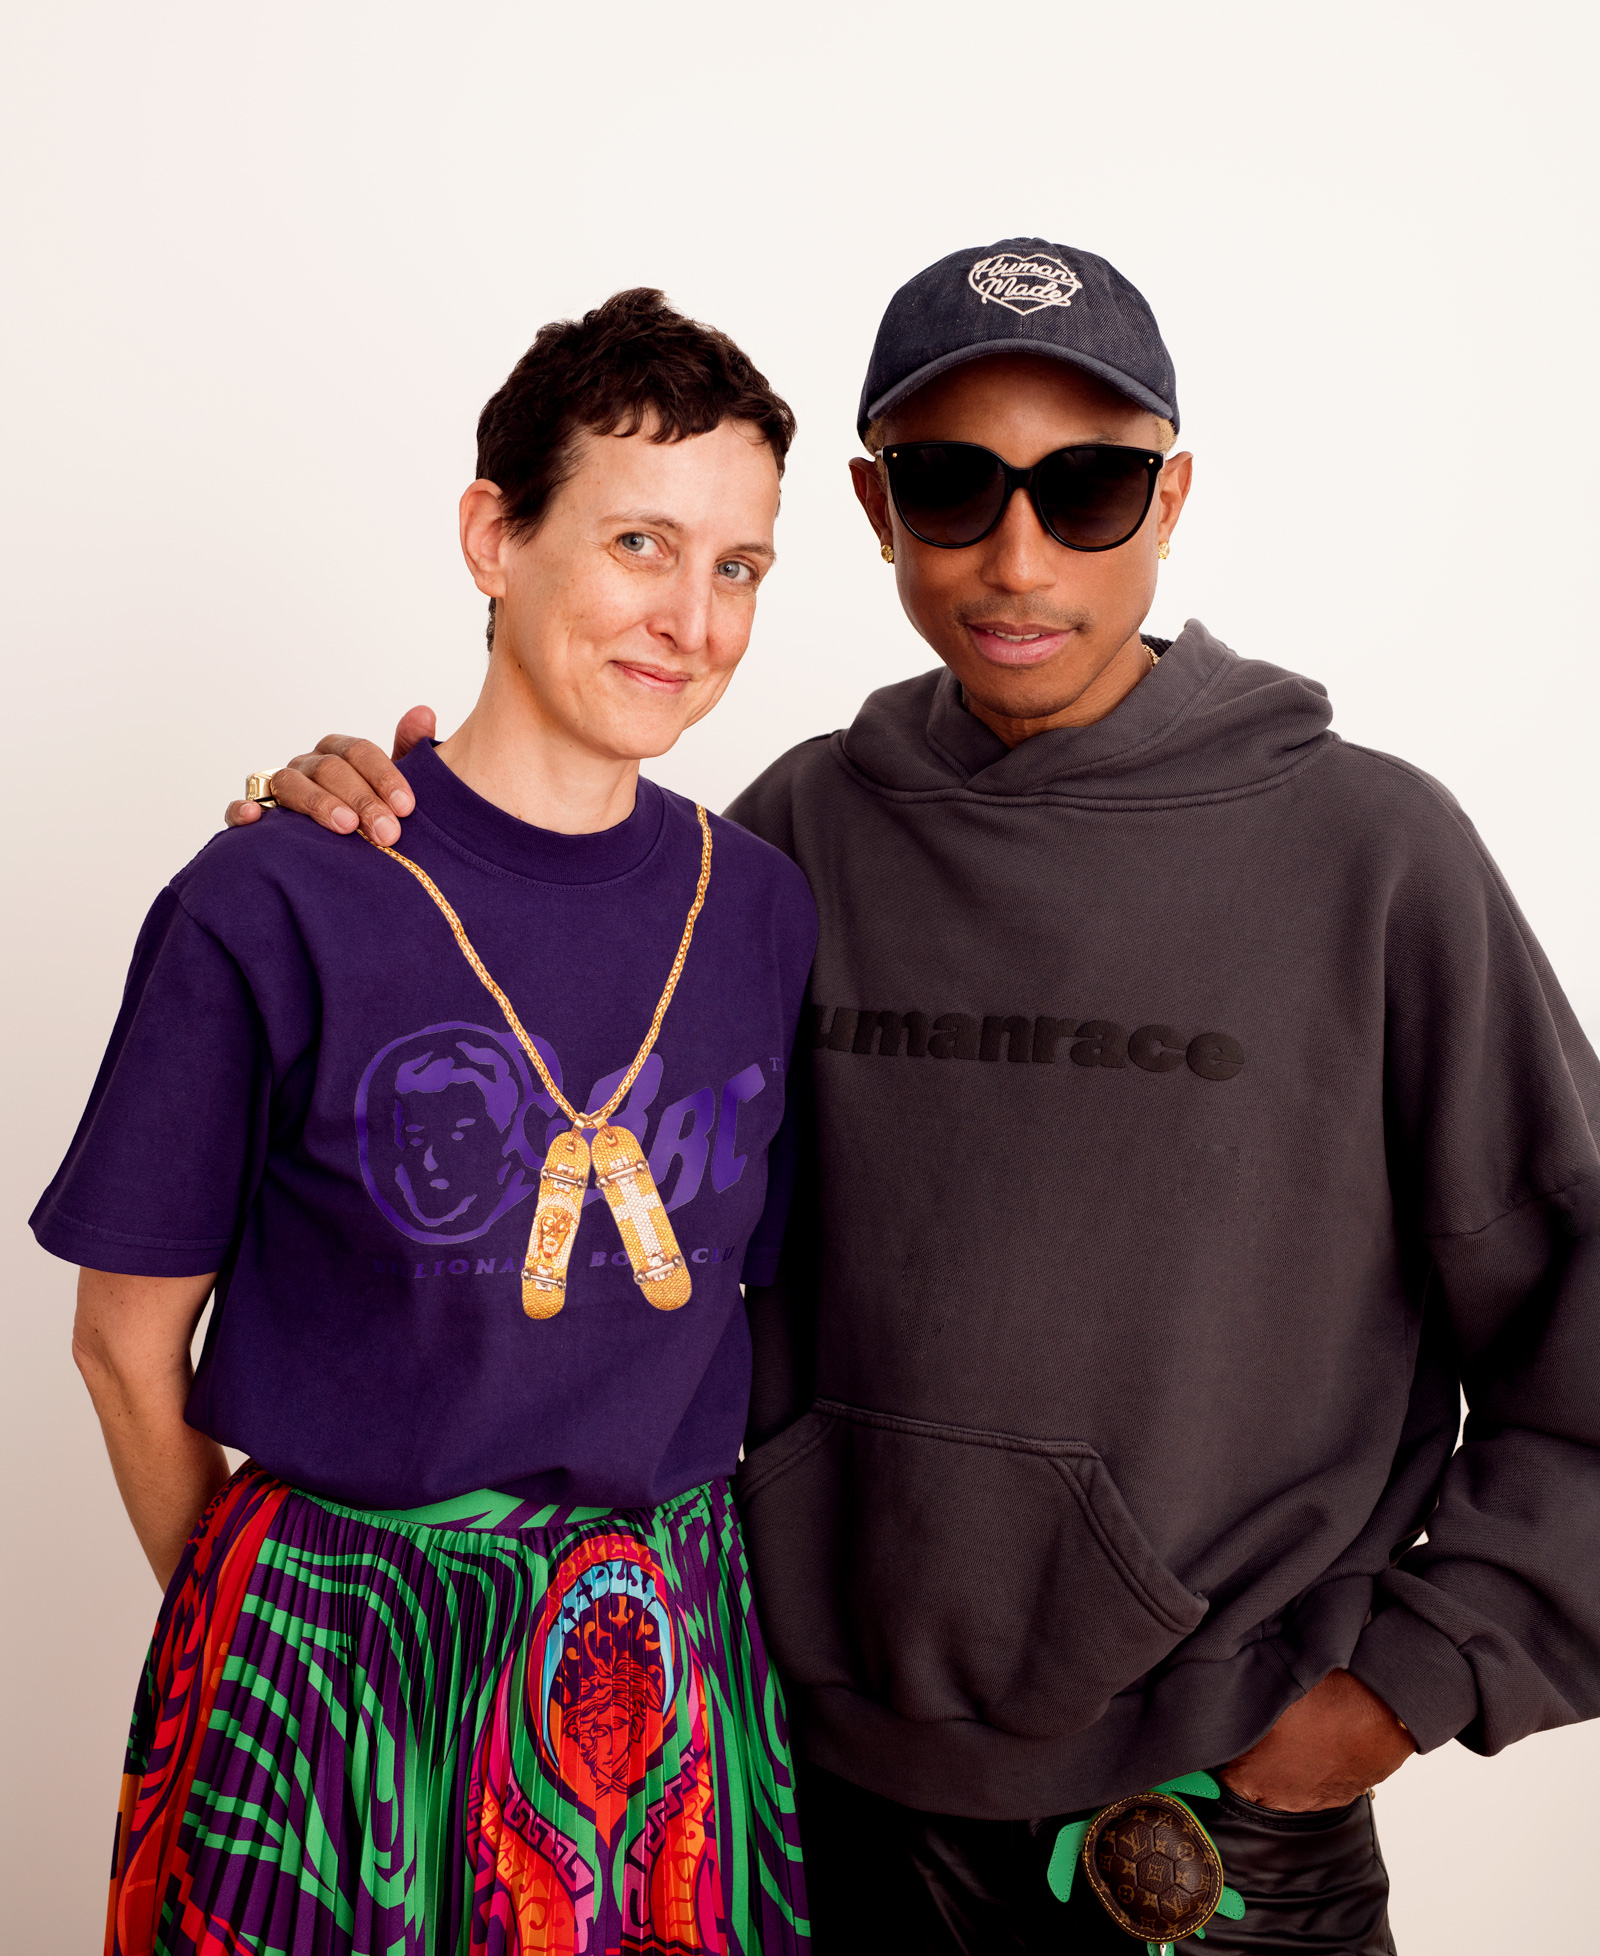 Sarah Andelman on Being Just Phriends With Pharrell